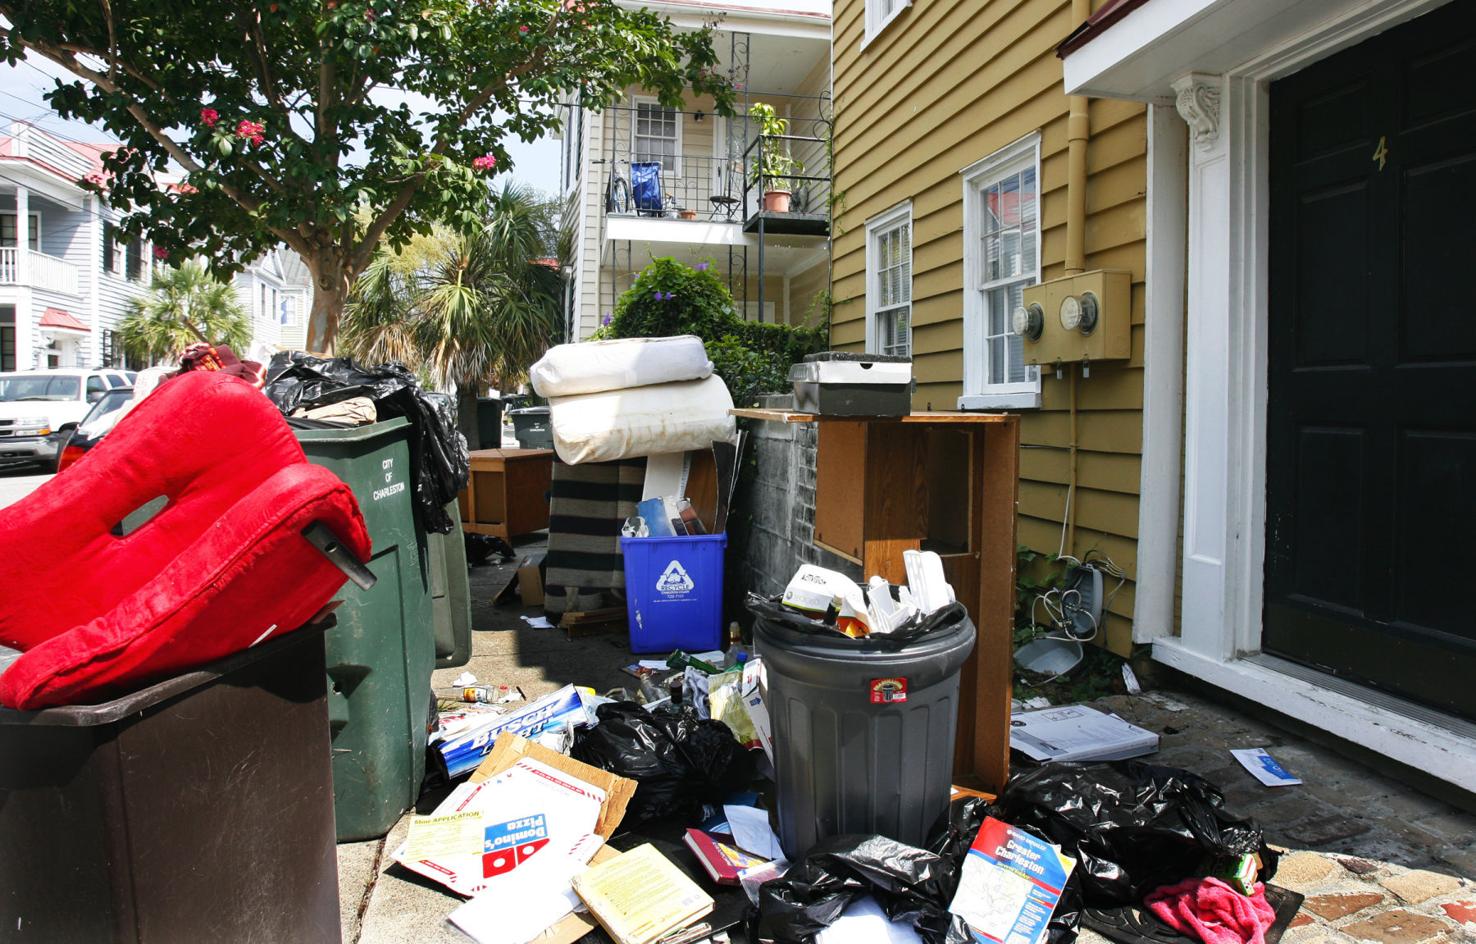 Charleston's Operation Move-out starts Wednesday to deal with exiting